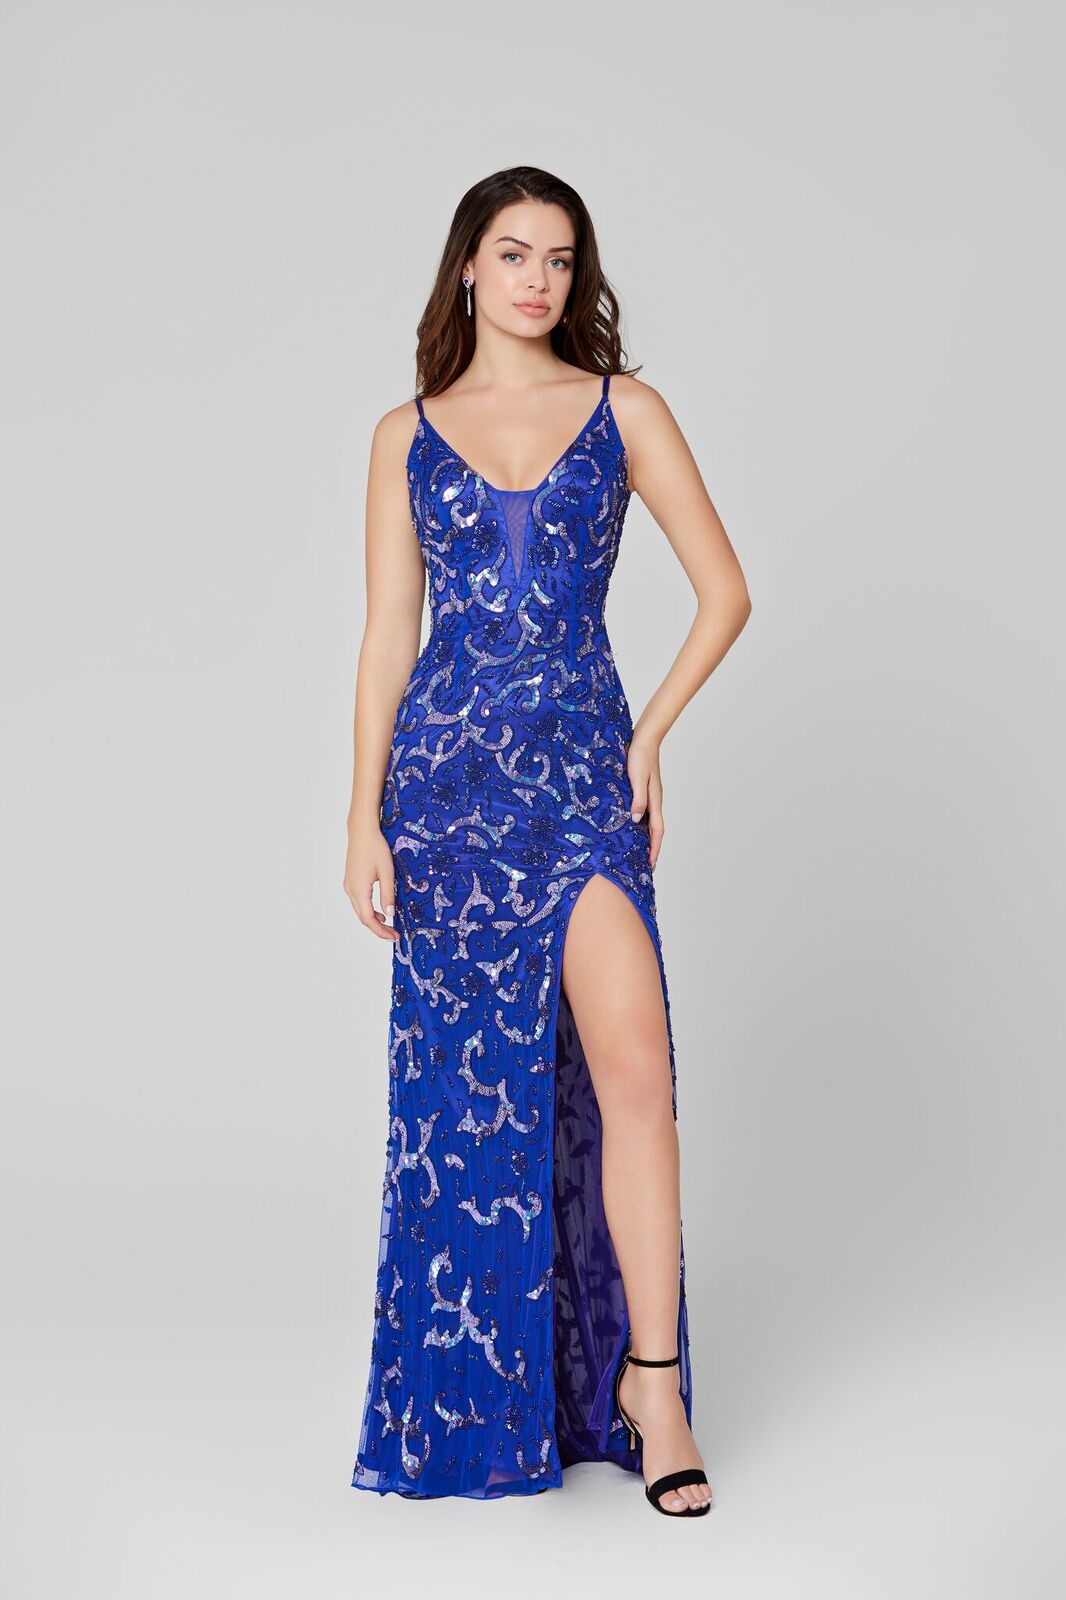 Primavera Couture 3450 Plunging V neckline with mesh panel sequin beaded evening gown.  Embellished Sequin Beaded Fitted Prom Dress Slit Formal evening gown. Open Back, Backless Form Fitted Silhouette.  Available colors:  Royal Blue  Sizes:  2